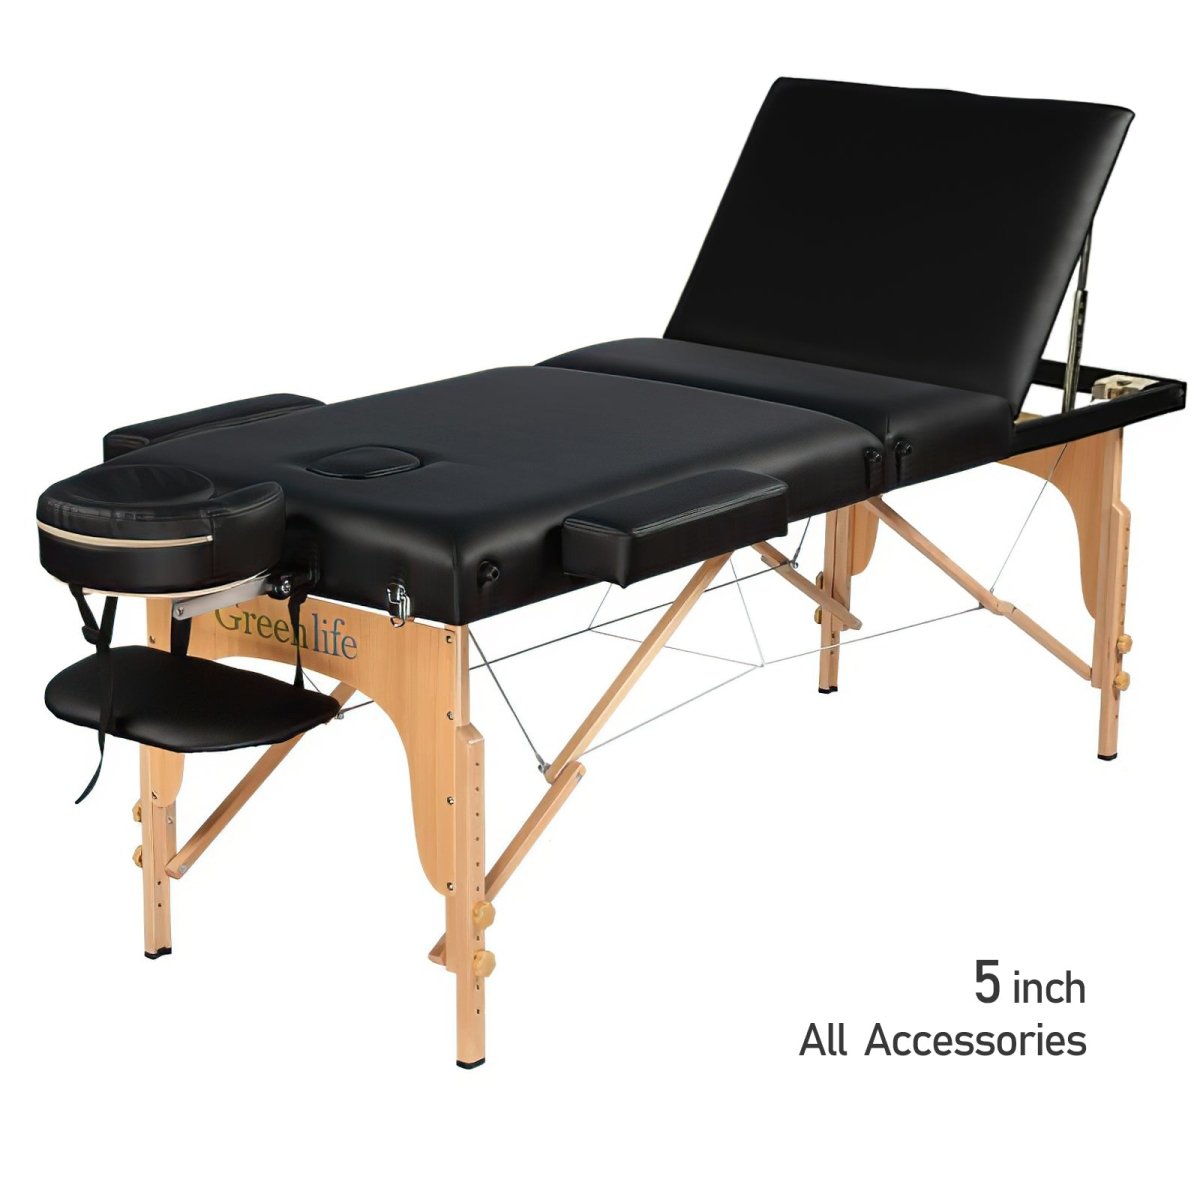 3-Section 5" Wooden Super Stable Portable Massage Table - MTW132 - Greenlife Treatment-Portable Massage Table